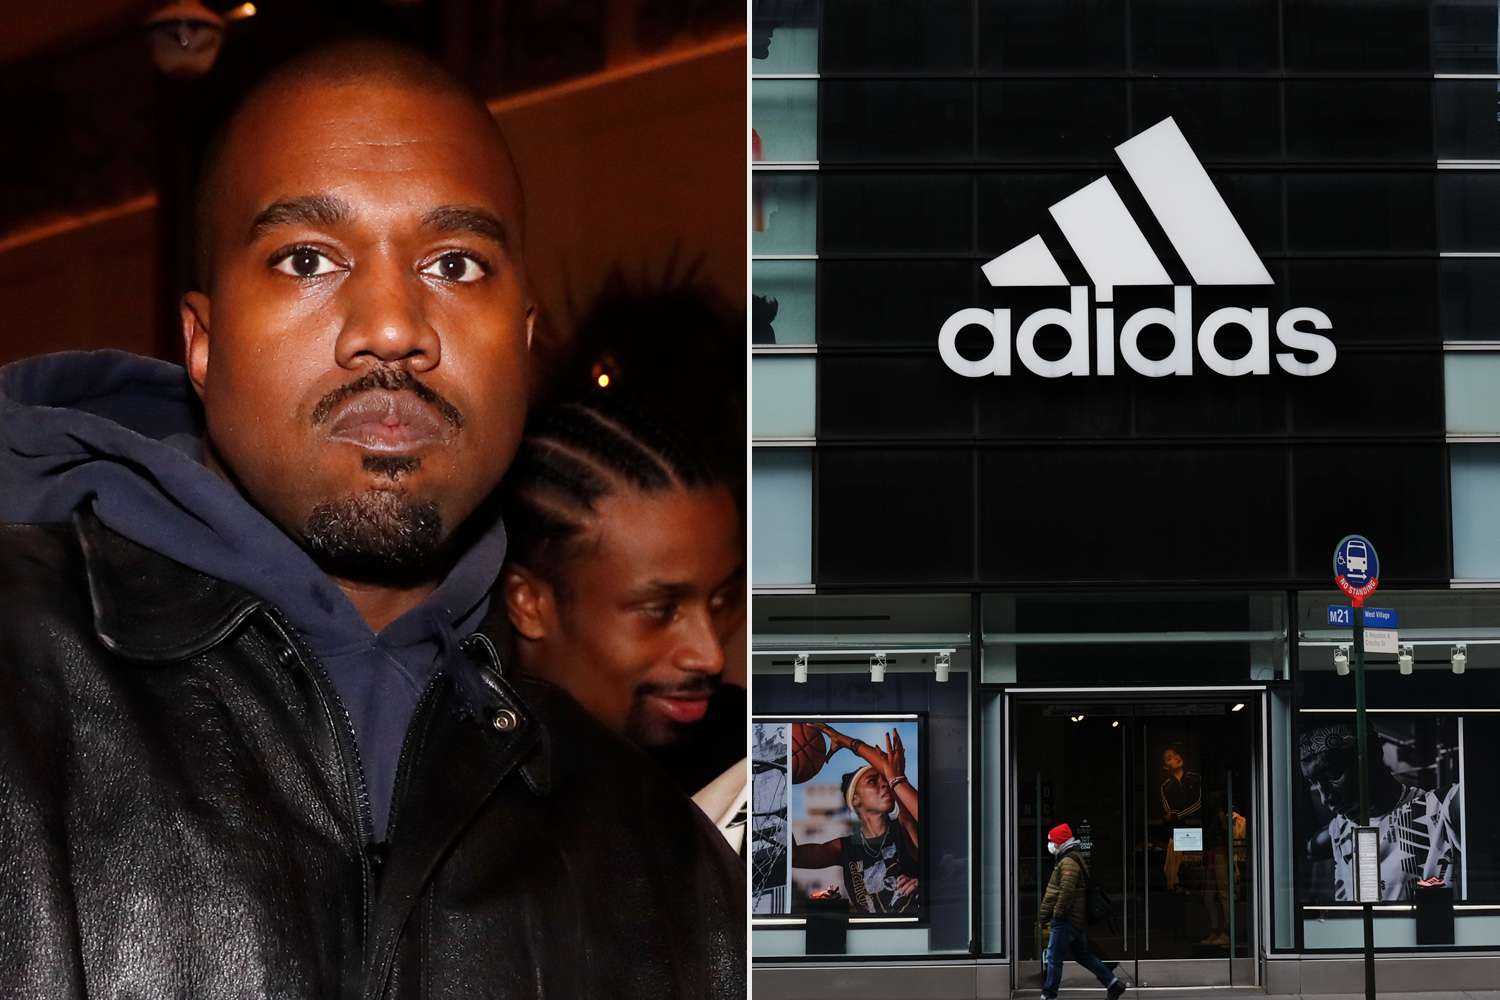 Kanye West cut off: When Adidas ended partnership over antisemitic outbursts